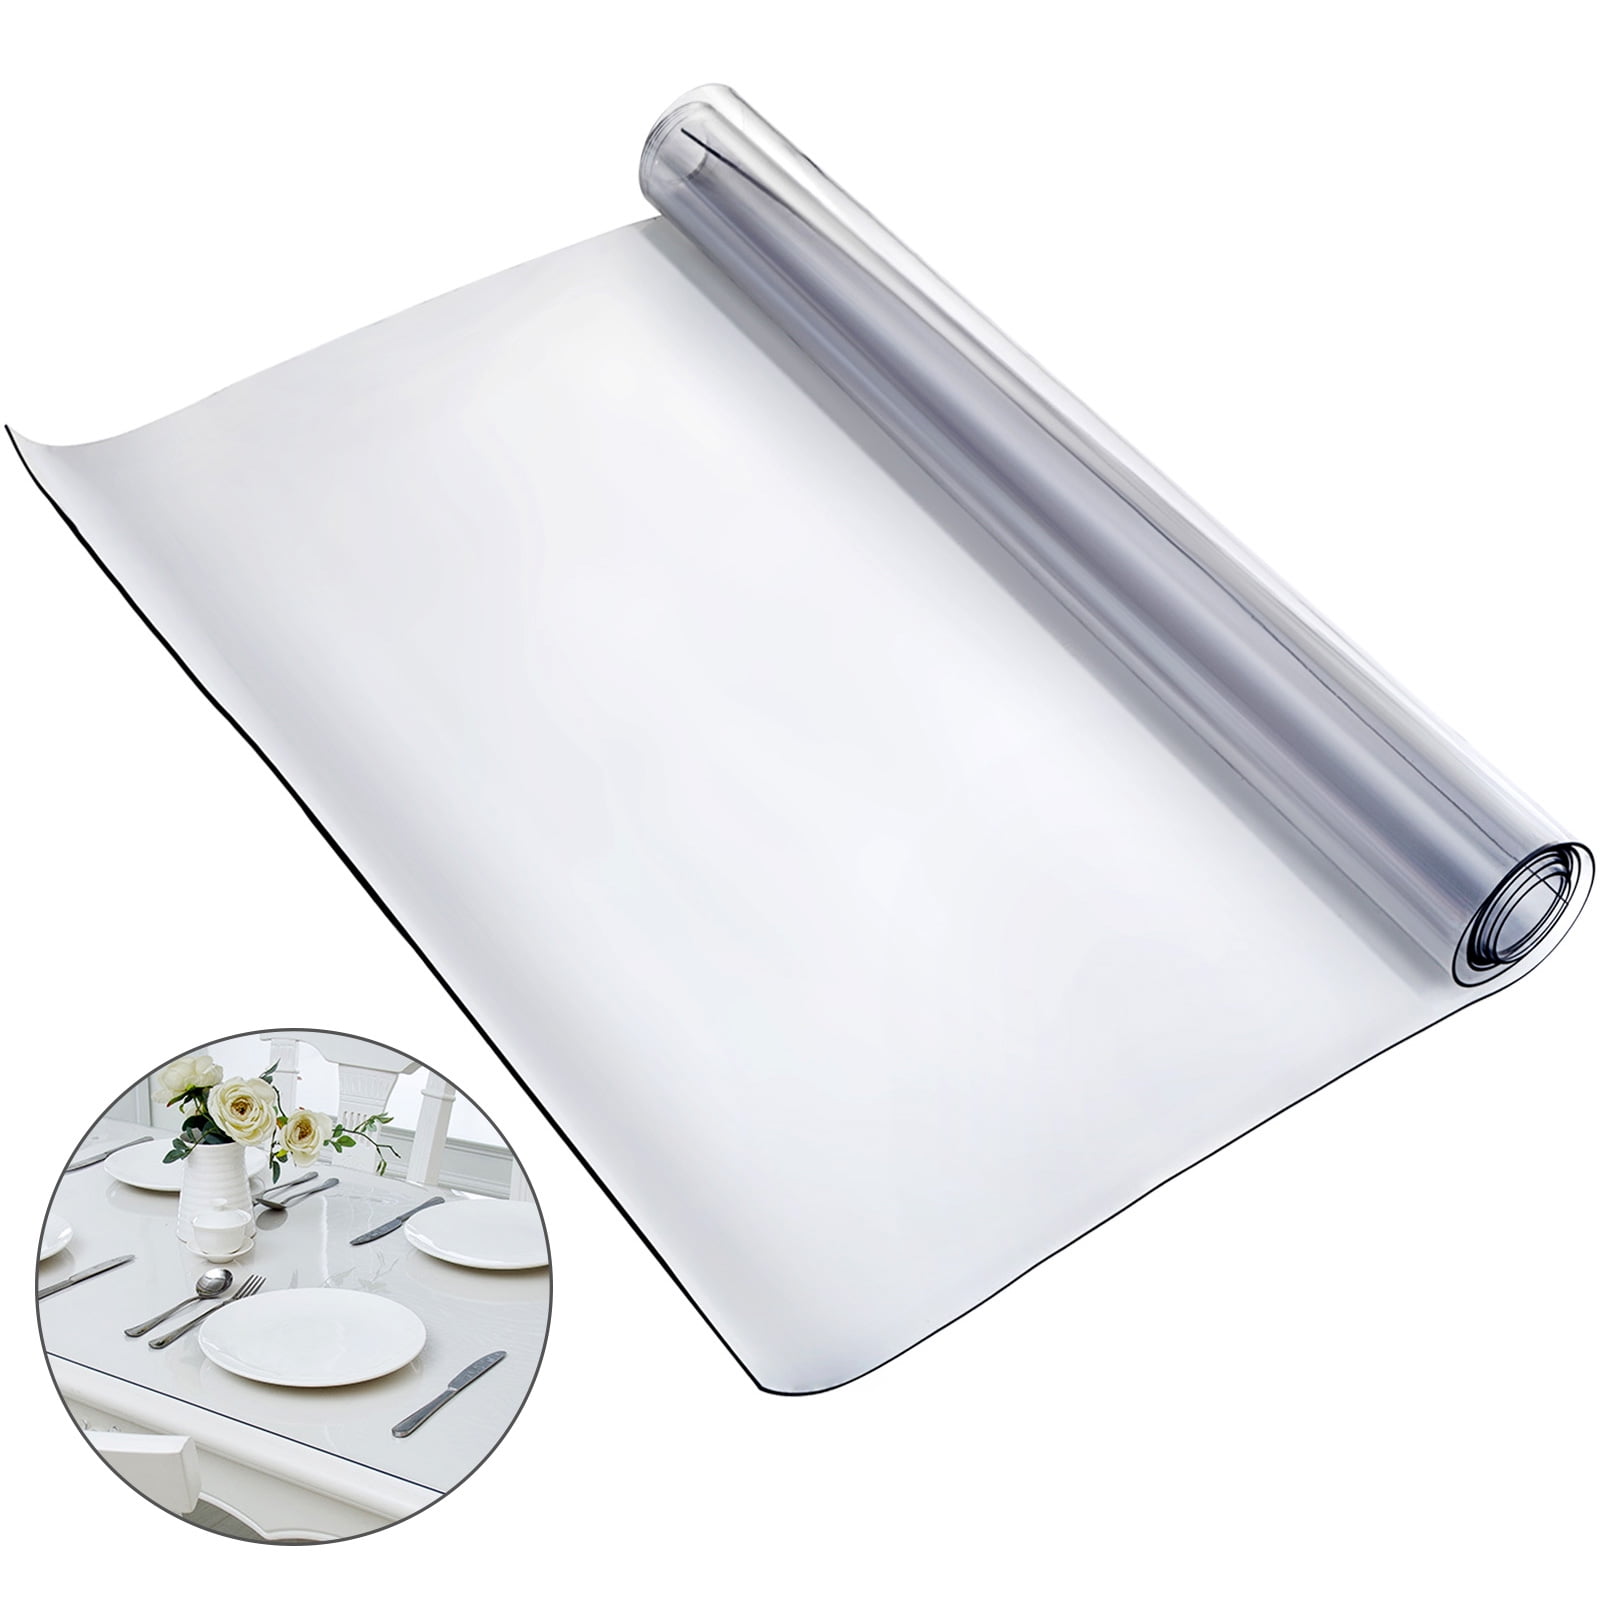 Folding Clear Table Cover Protector 16x22 inch Transparent PVC Table Pad  Mat Crystal Vinyl Waterproof Plastic Table Top Cloth for Dining Table  Coffee